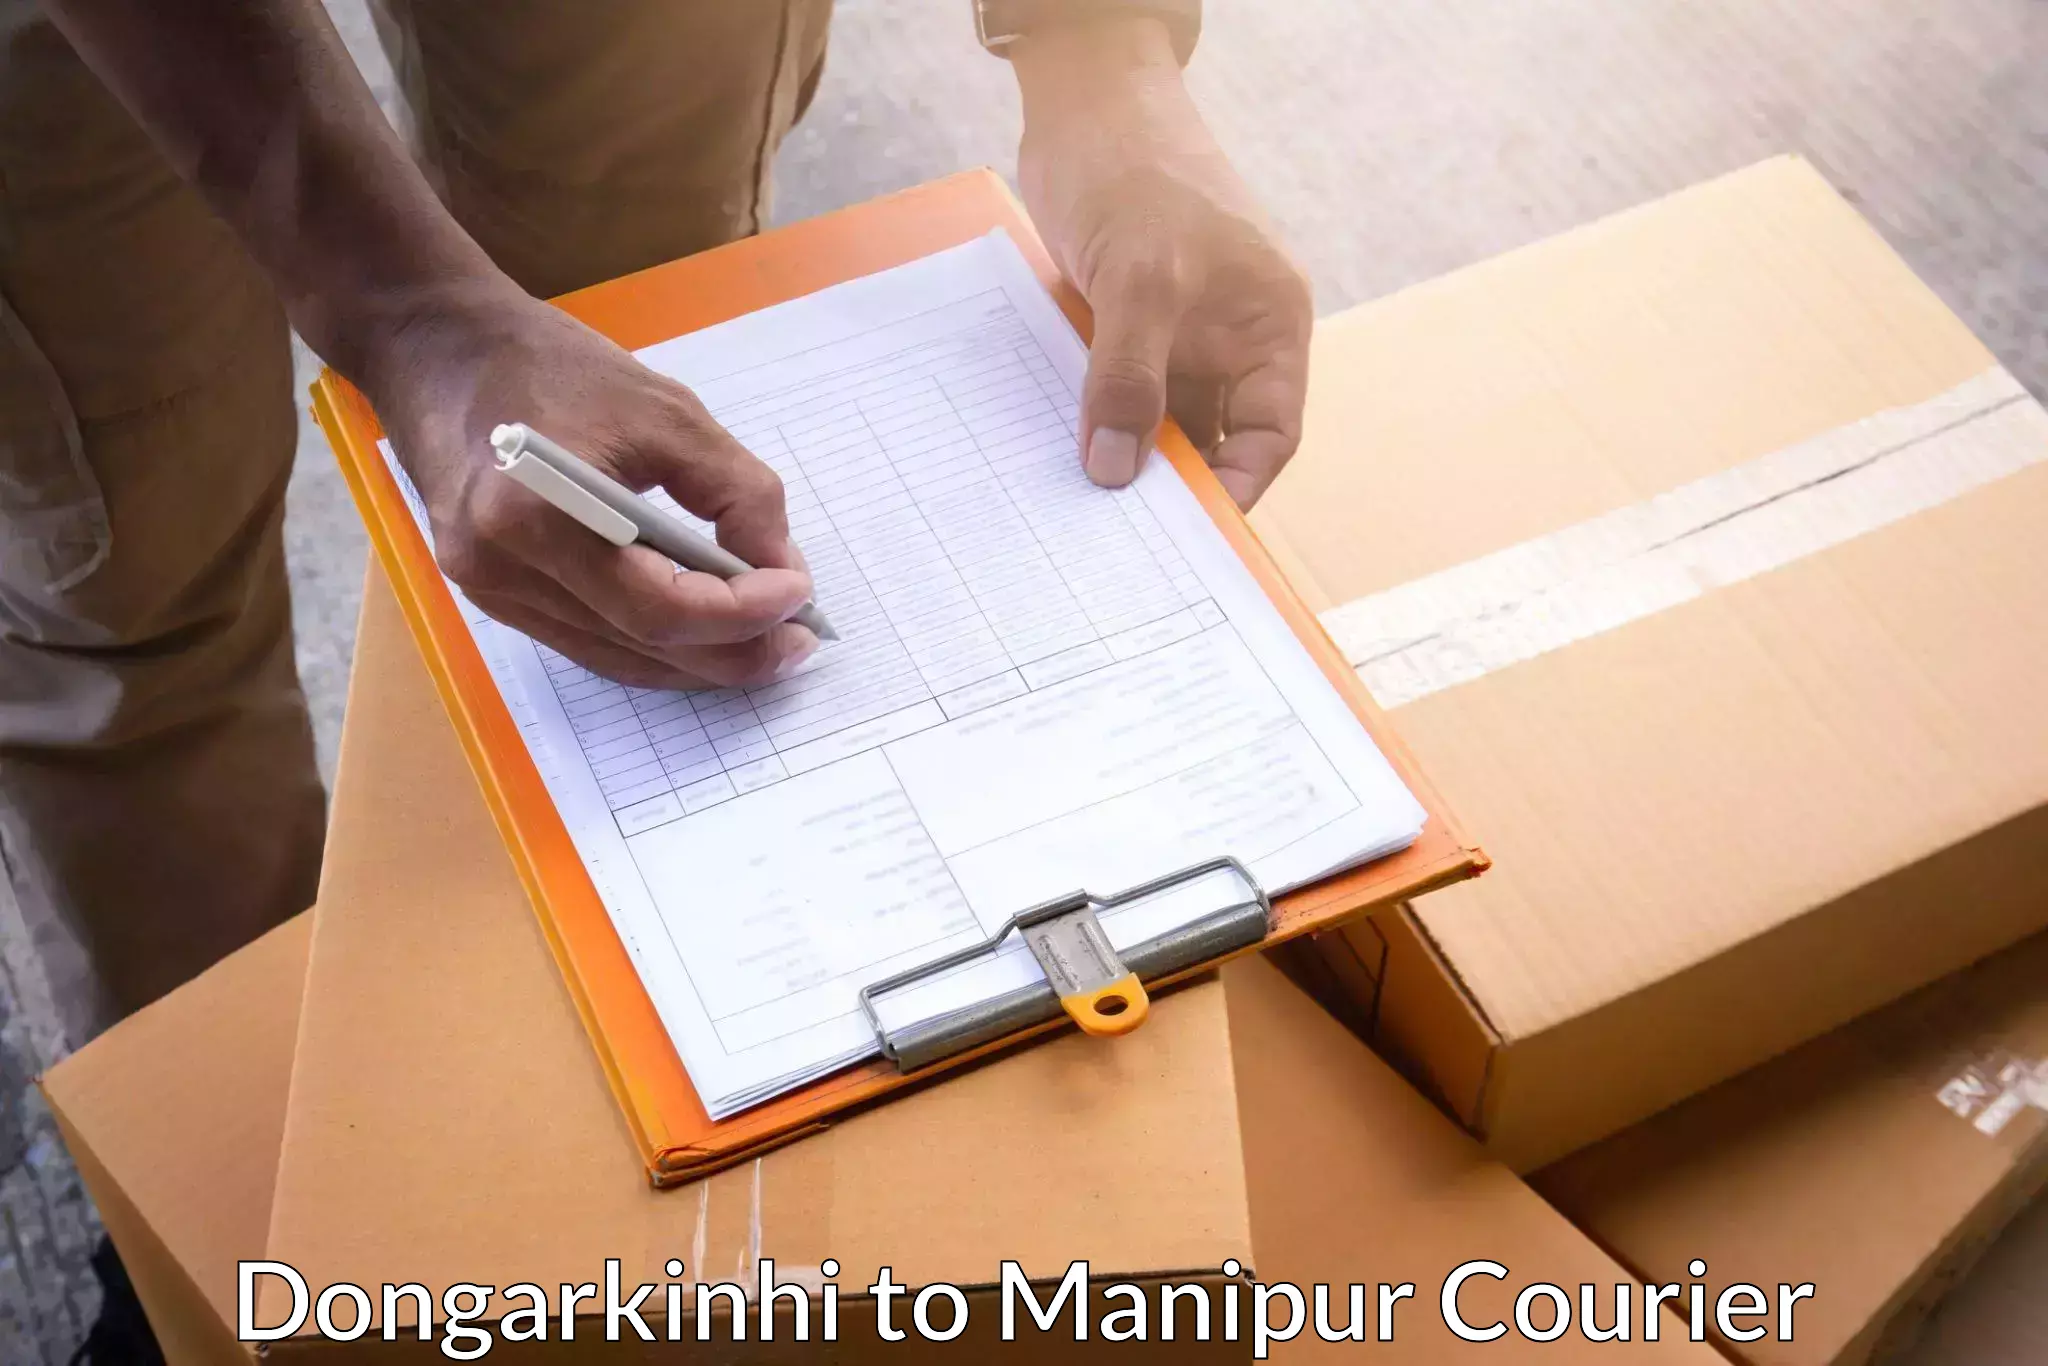 Residential courier service Dongarkinhi to Ukhrul